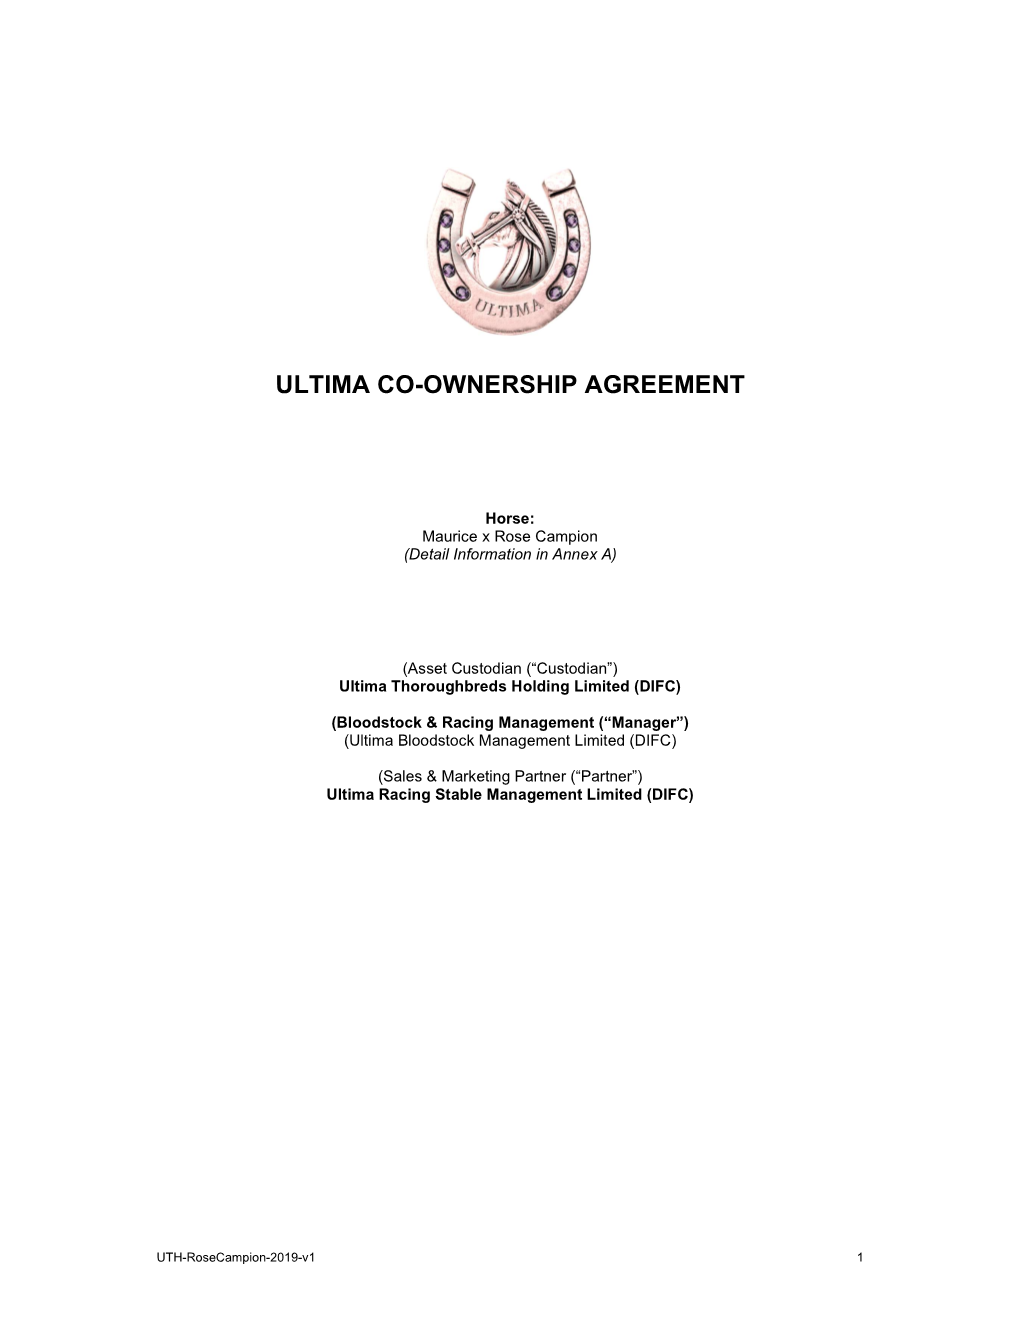 Ultima Co-Ownership Agreement